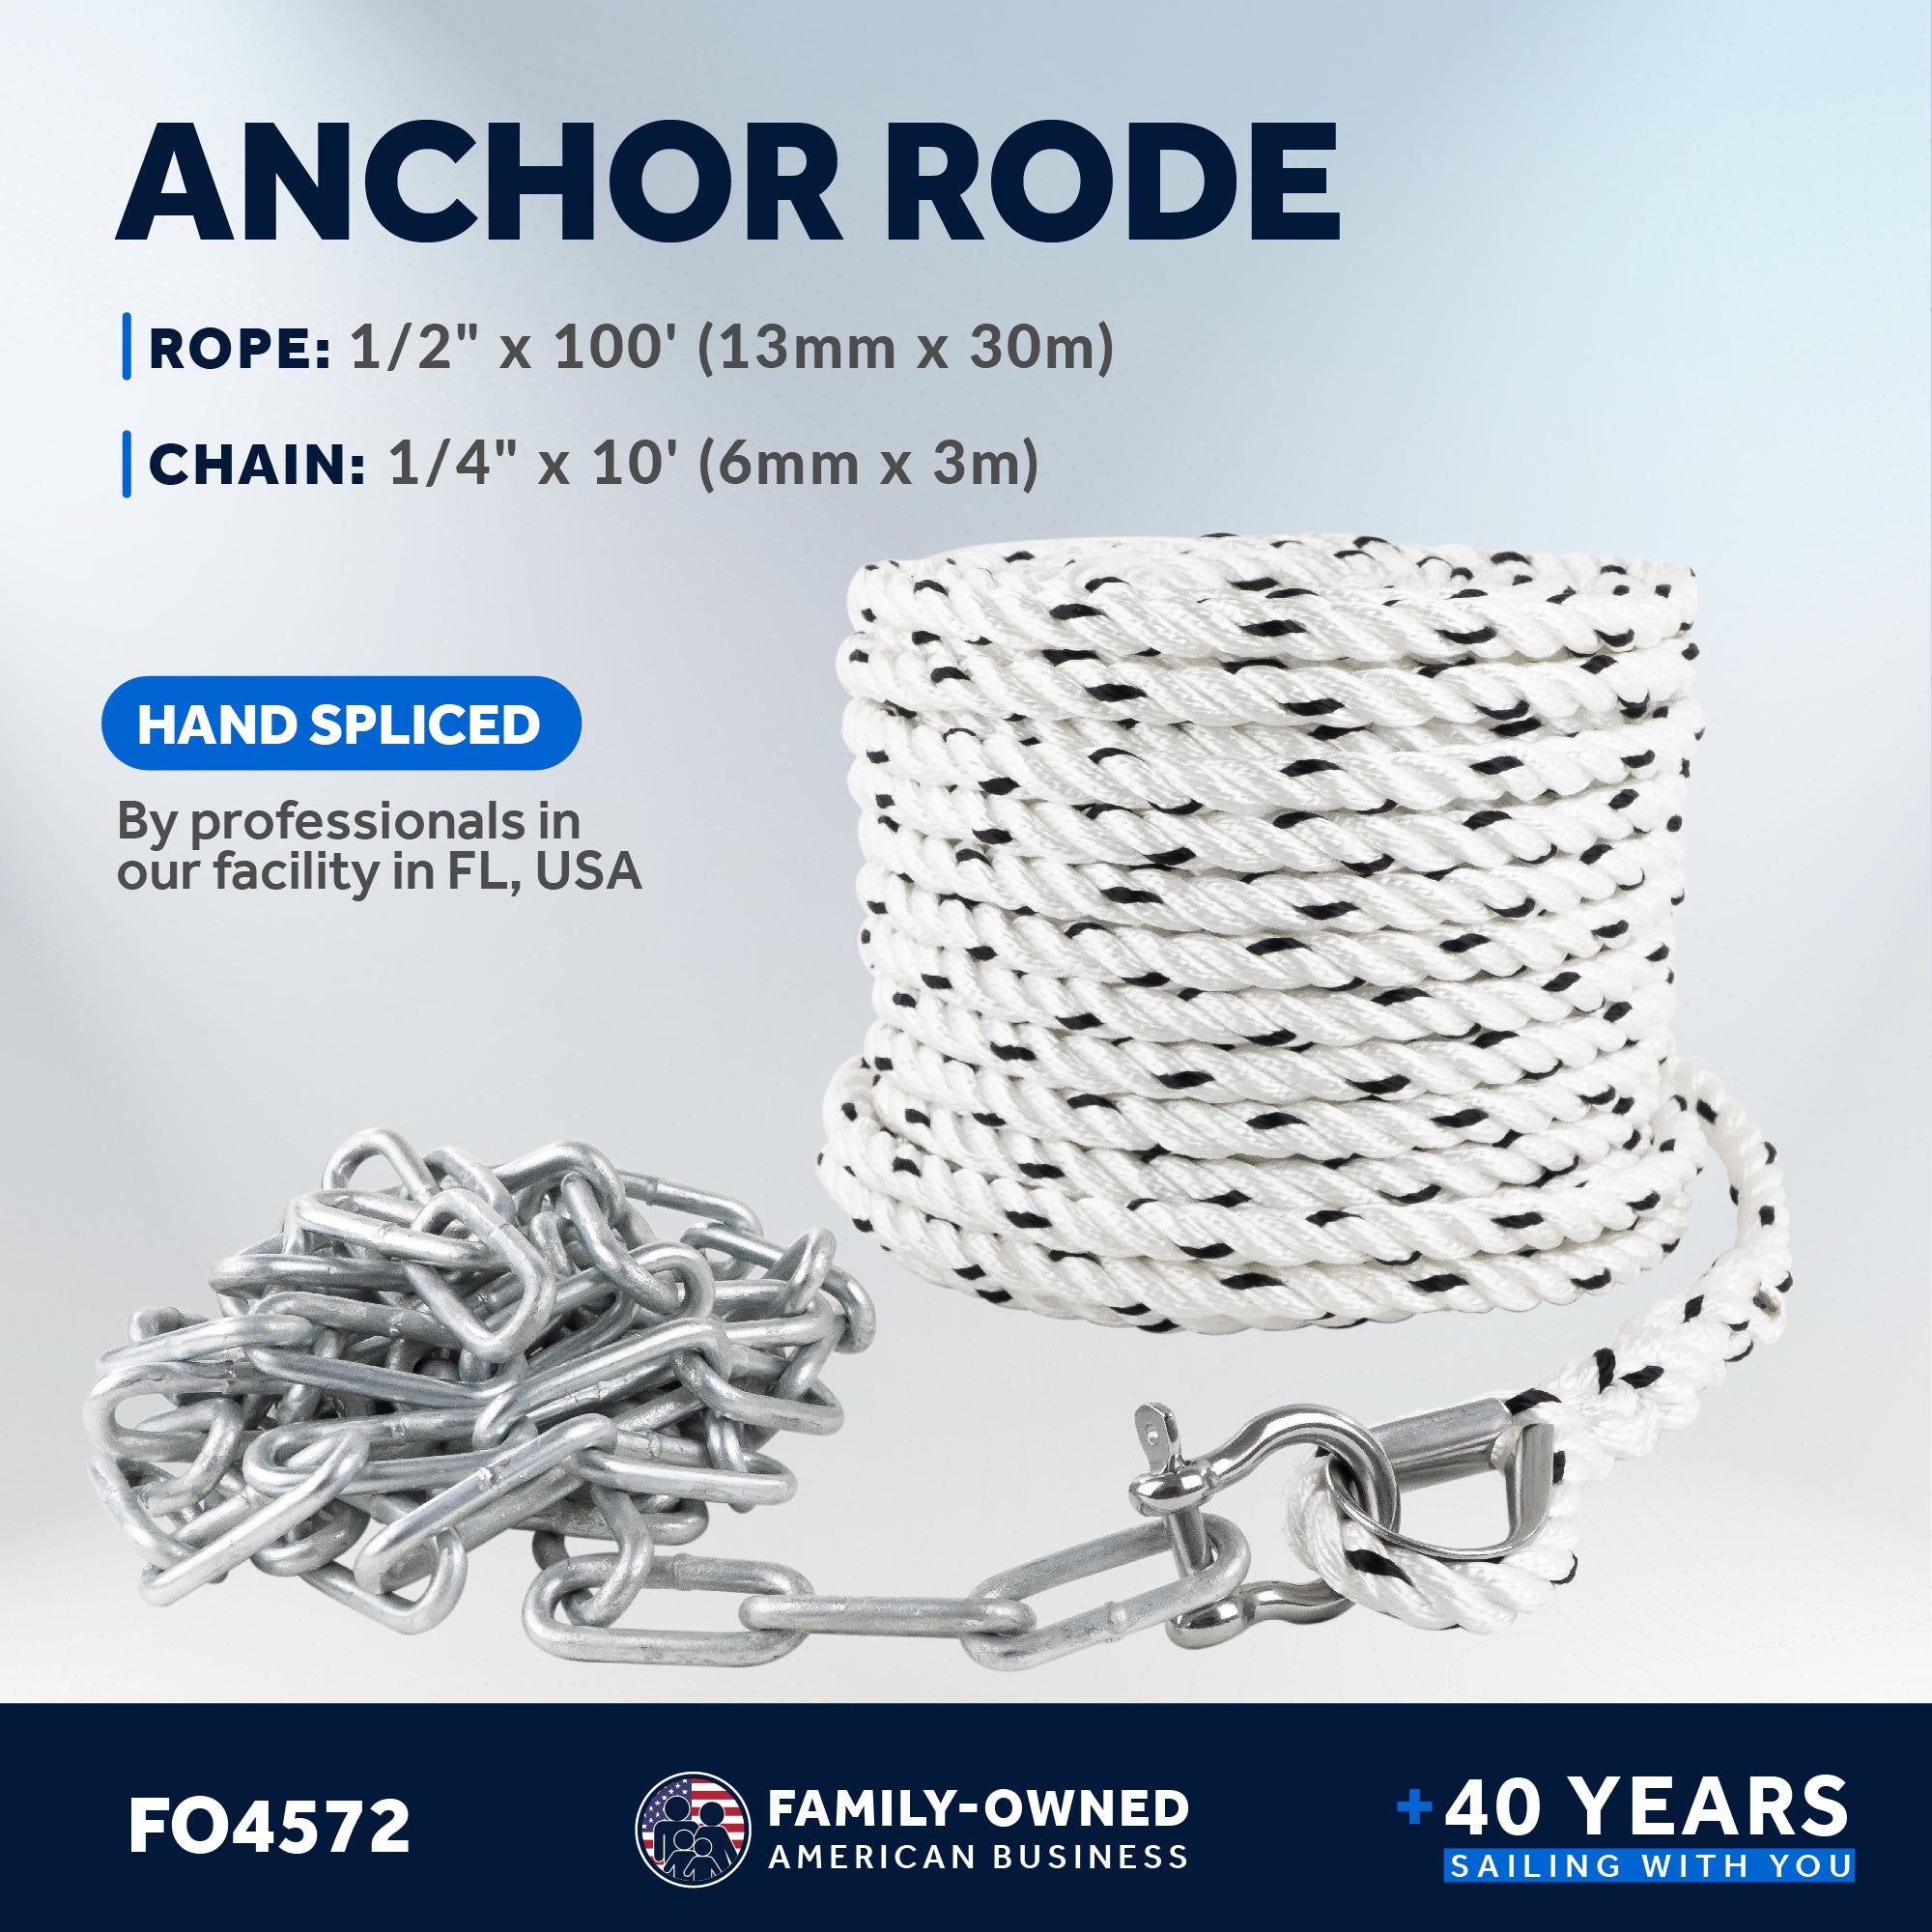 Anchor Rode, 1/2" x 100' Nylon 3-Strand Rope, 1/4" x 10' Hot Dipped Galvanized Steel Chain - FO4572